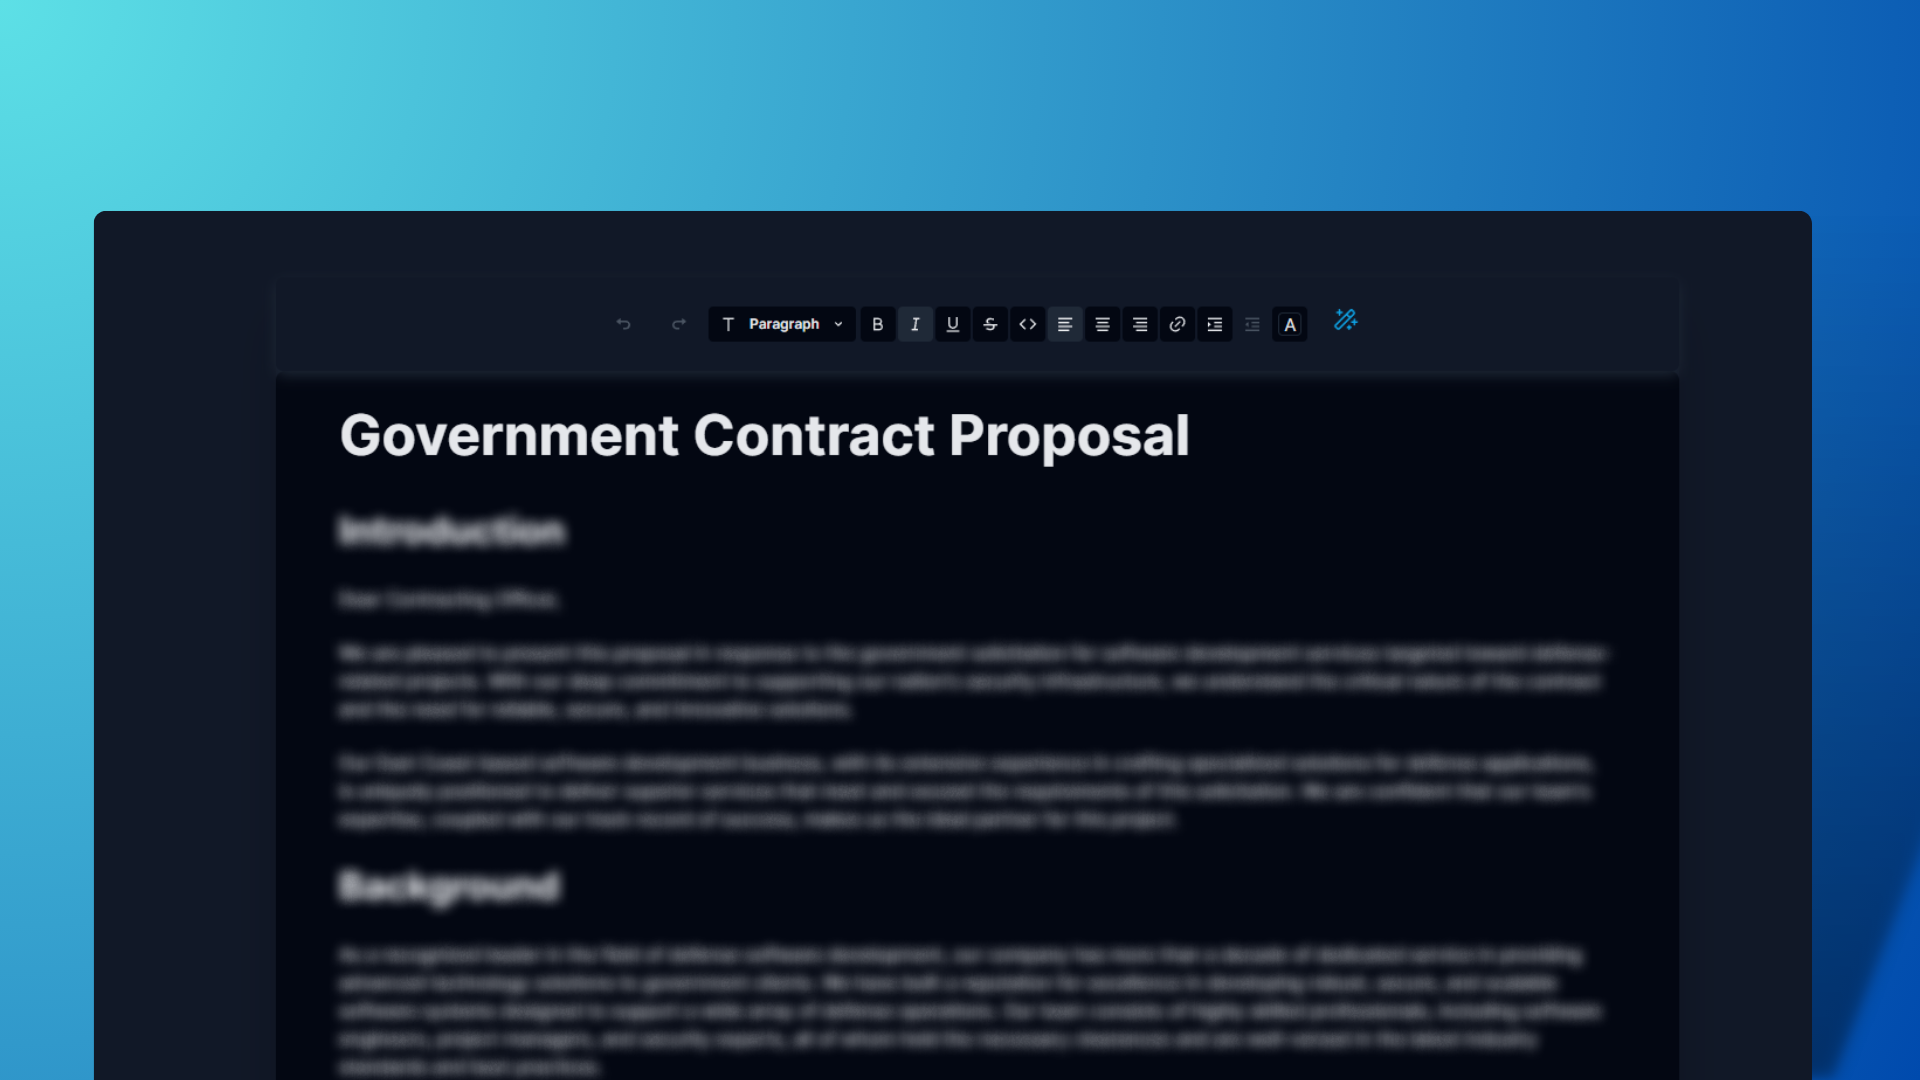 Cover Image for Simplifying Government Contract Drafting: SamSearch's AI Draft Generator